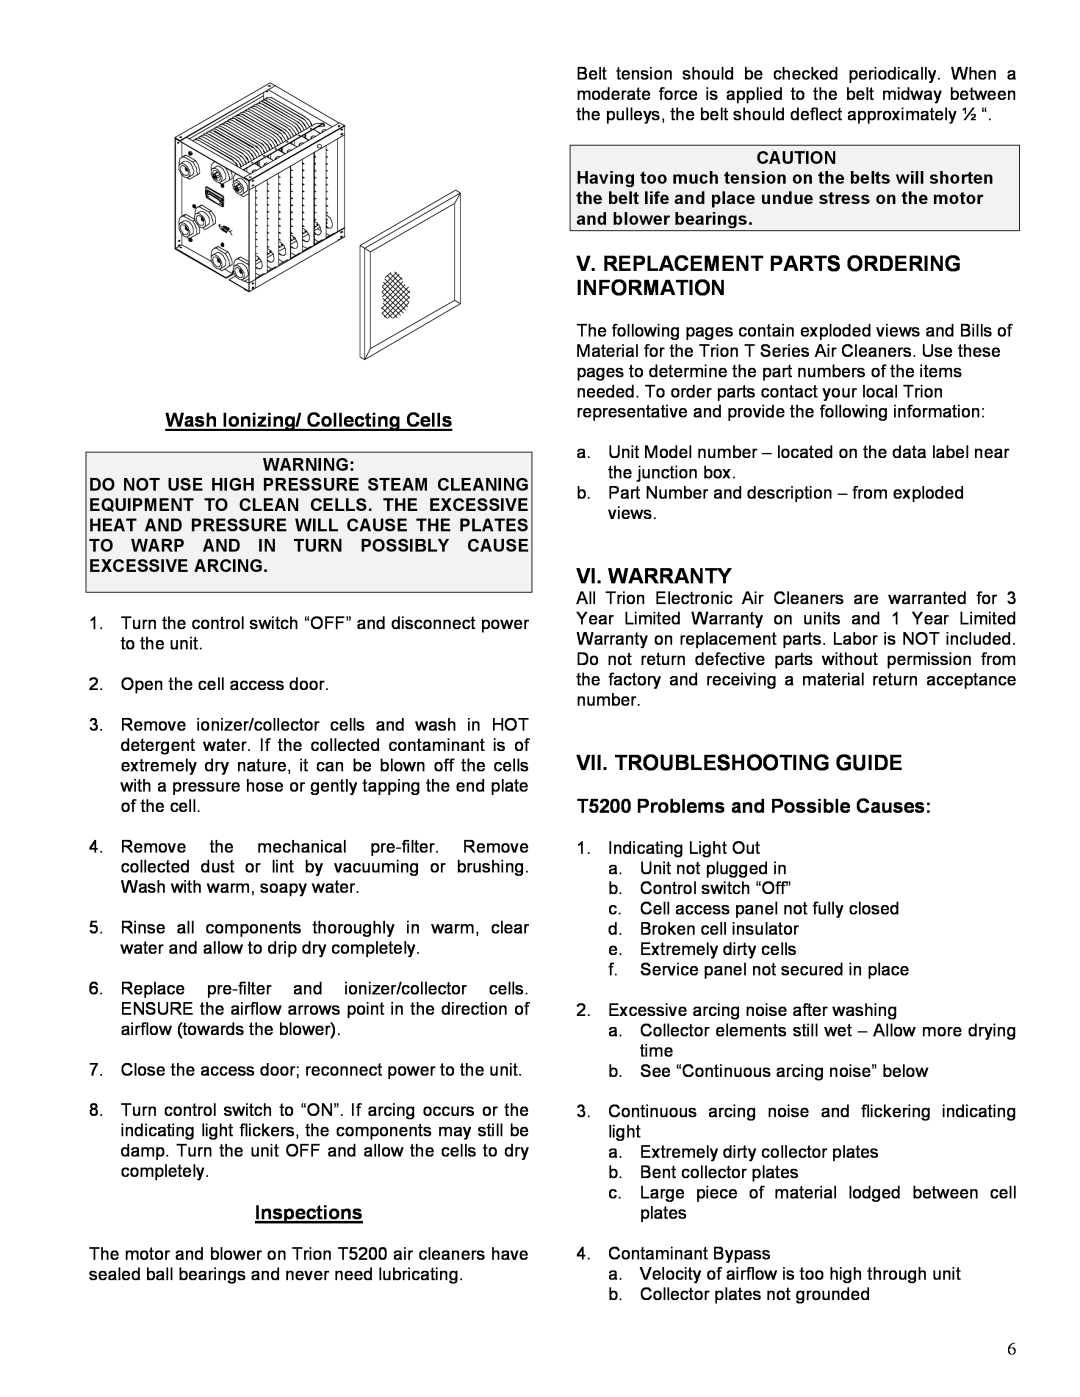 Trion T5200 manual V. Replacement Parts Ordering Information, Vi. Warranty, Vii. Troubleshooting Guide, Inspections 